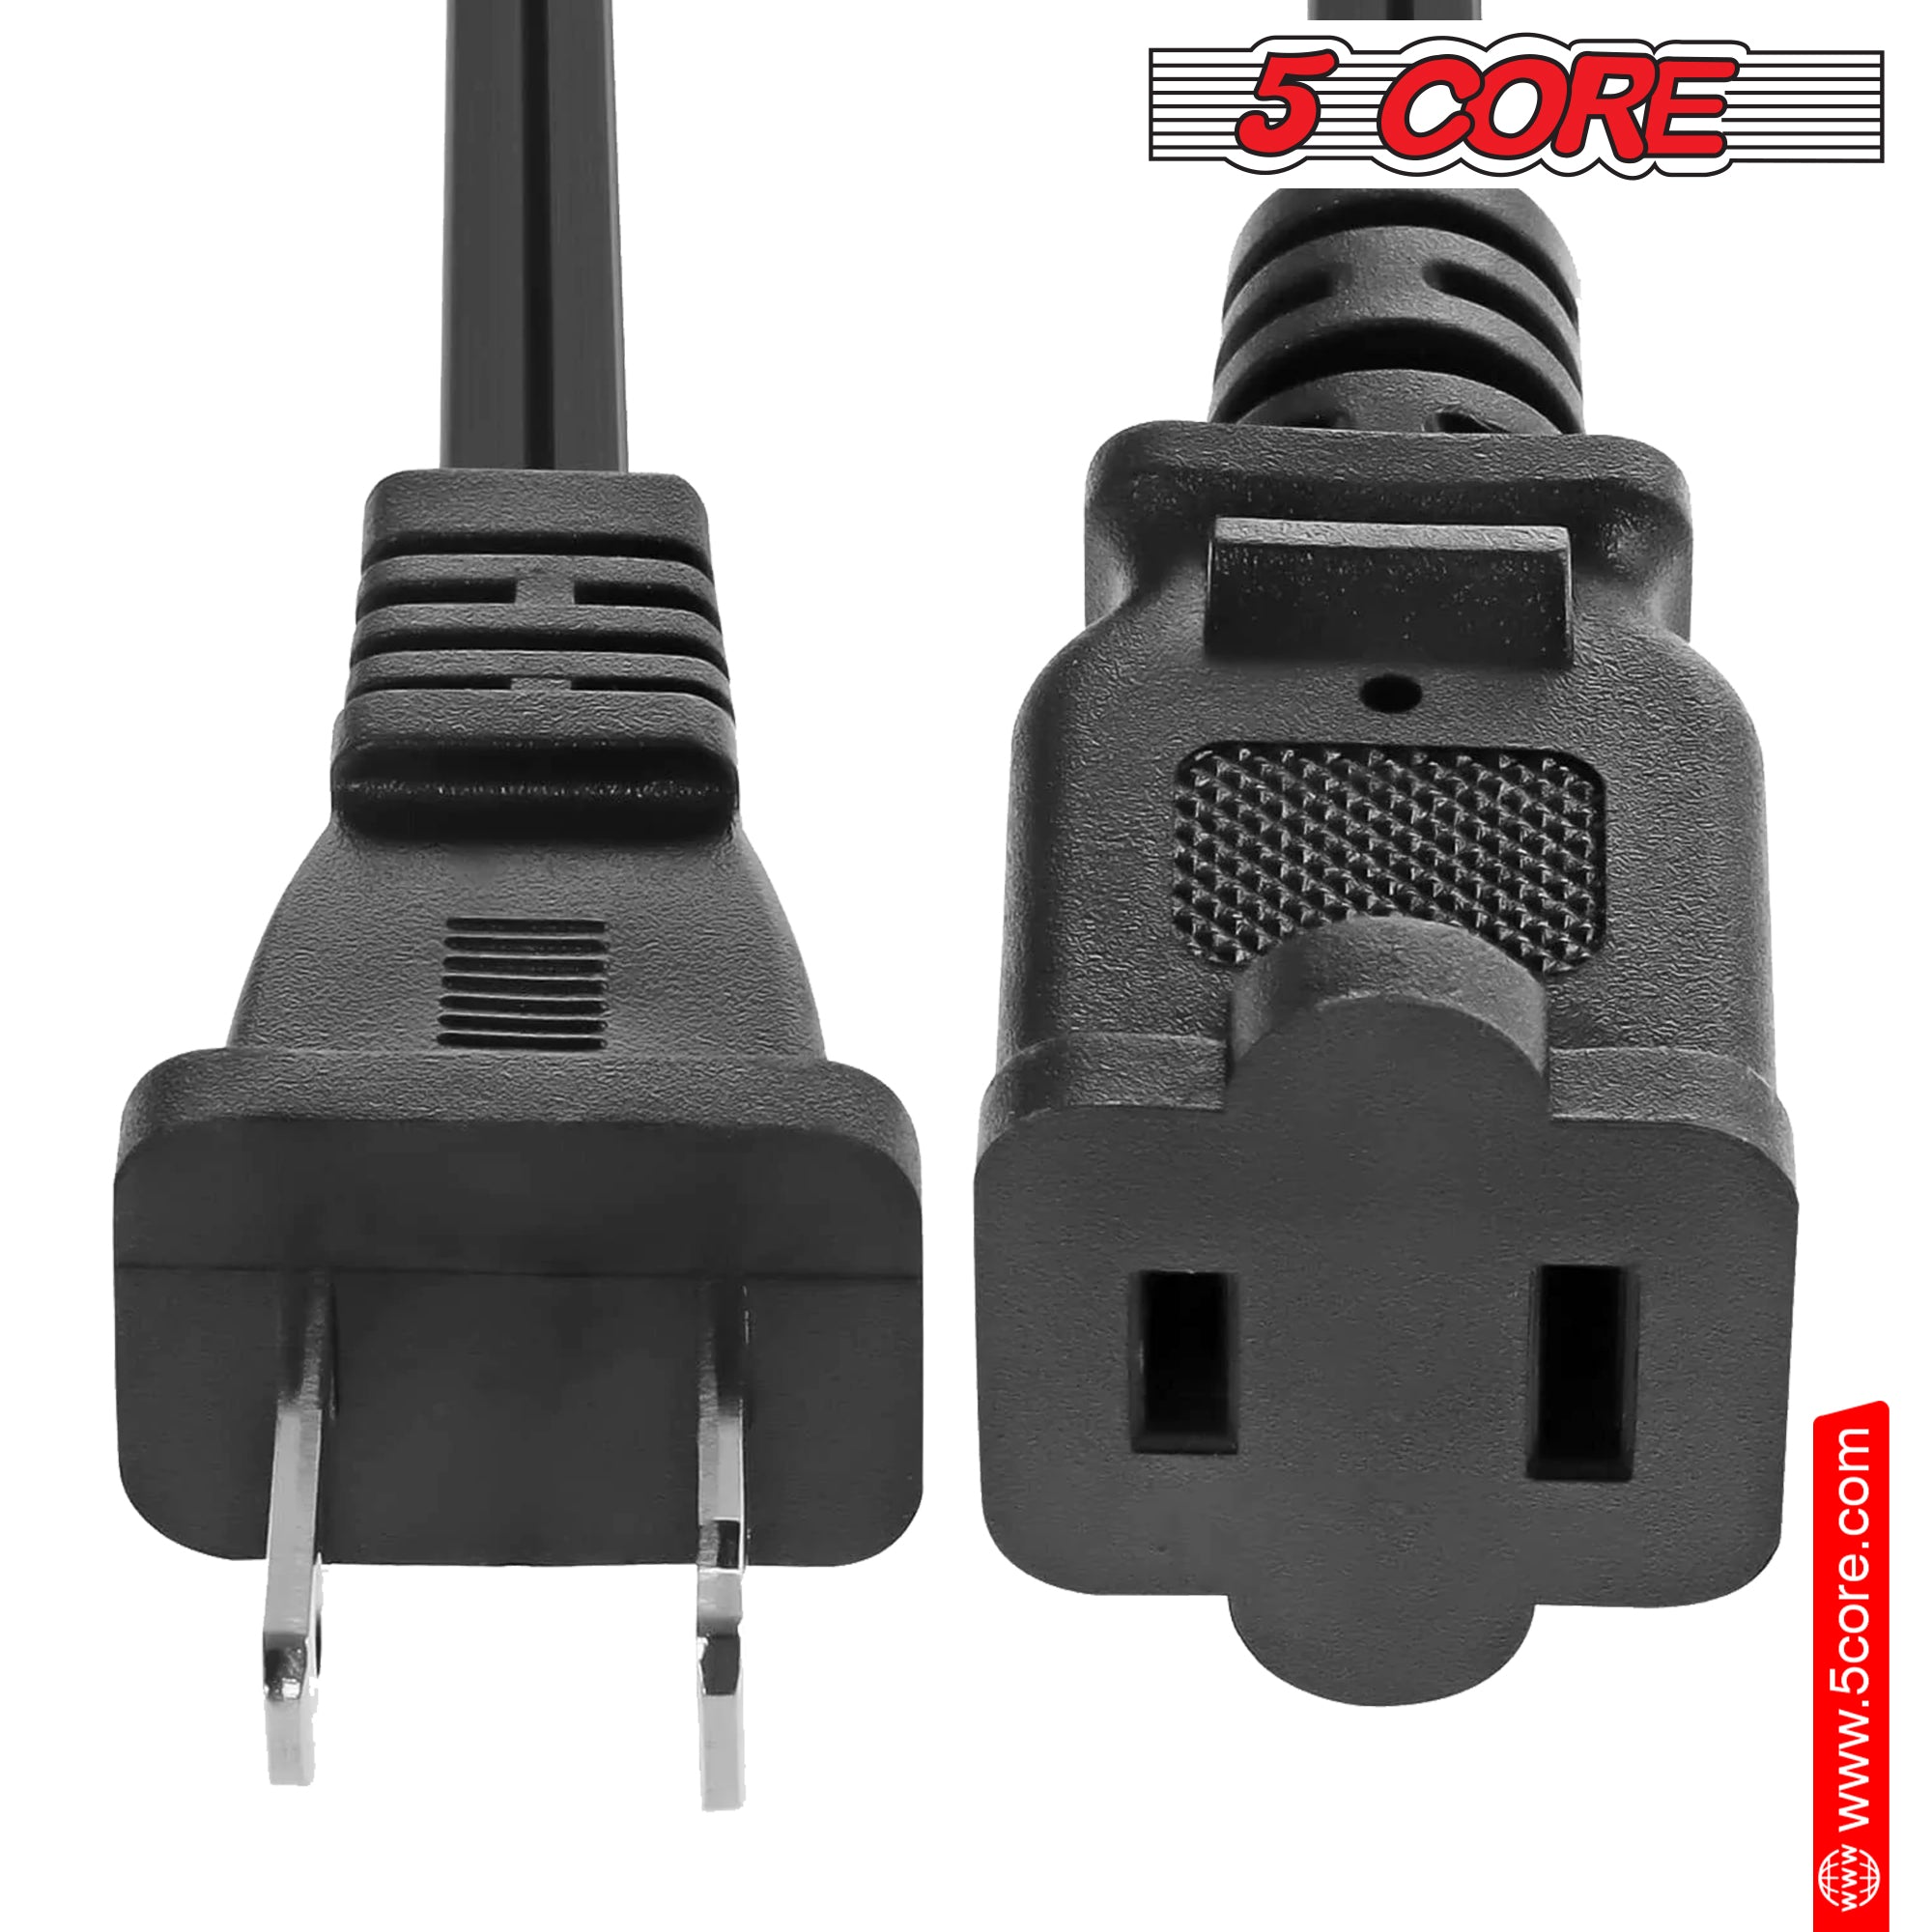 5 Core 15 Ft Black AC Power Cord: Reliable Extension Solution